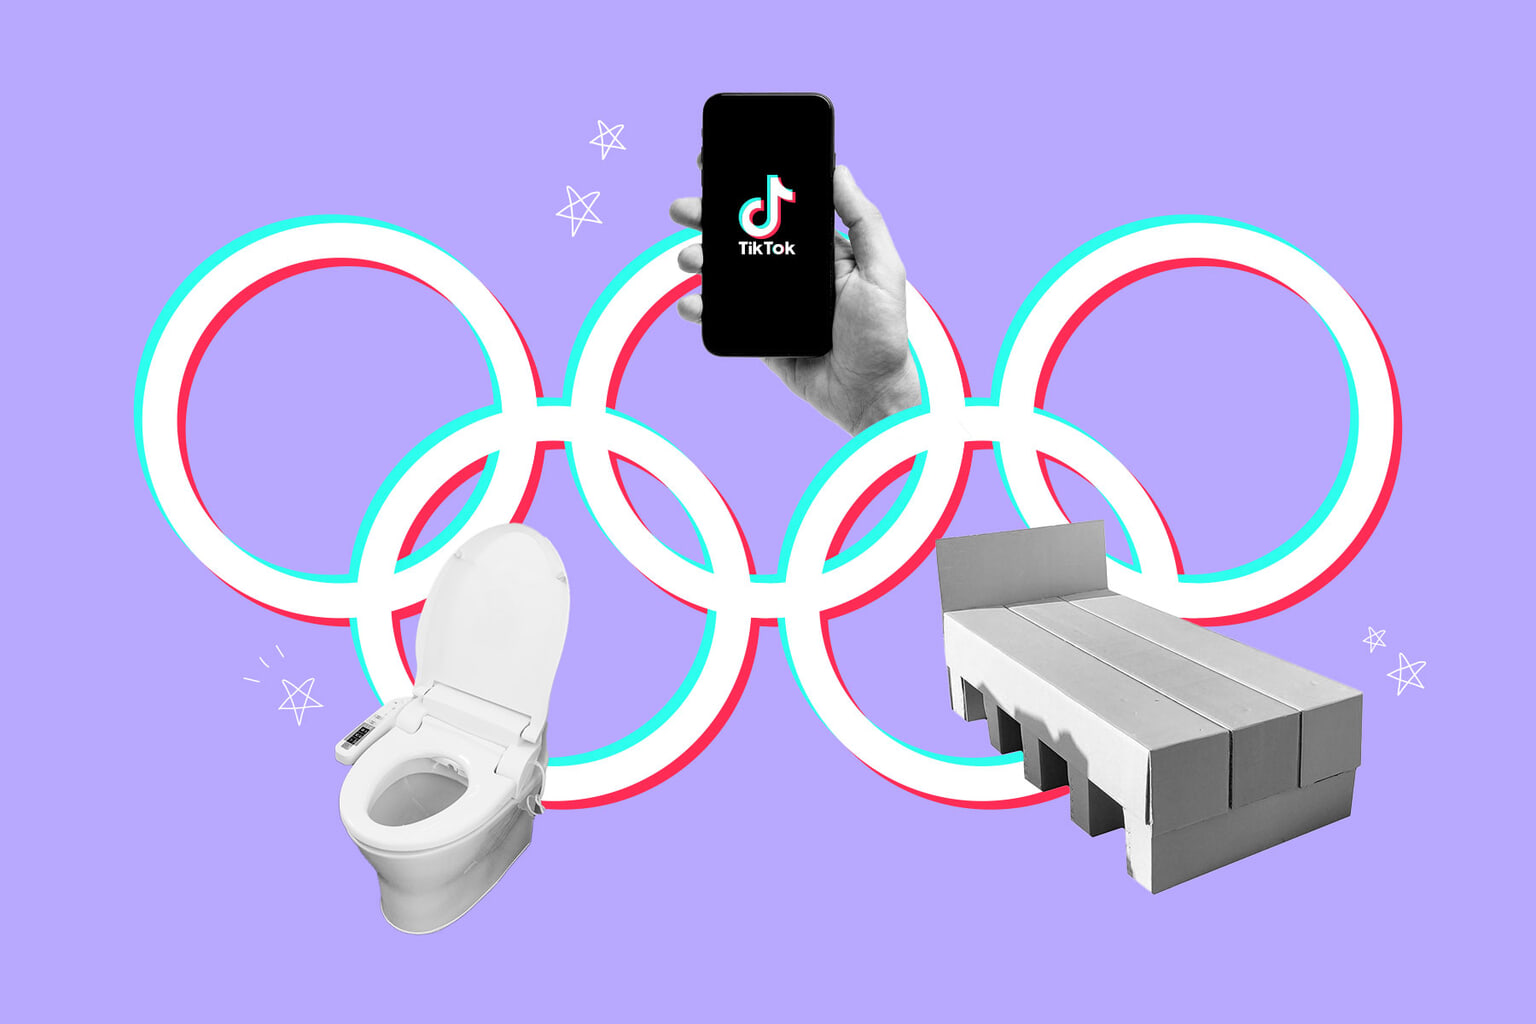 Olympic Athletes on TikTok Are Going Viral for Their Hilarious Behind-the-Scenes Antics